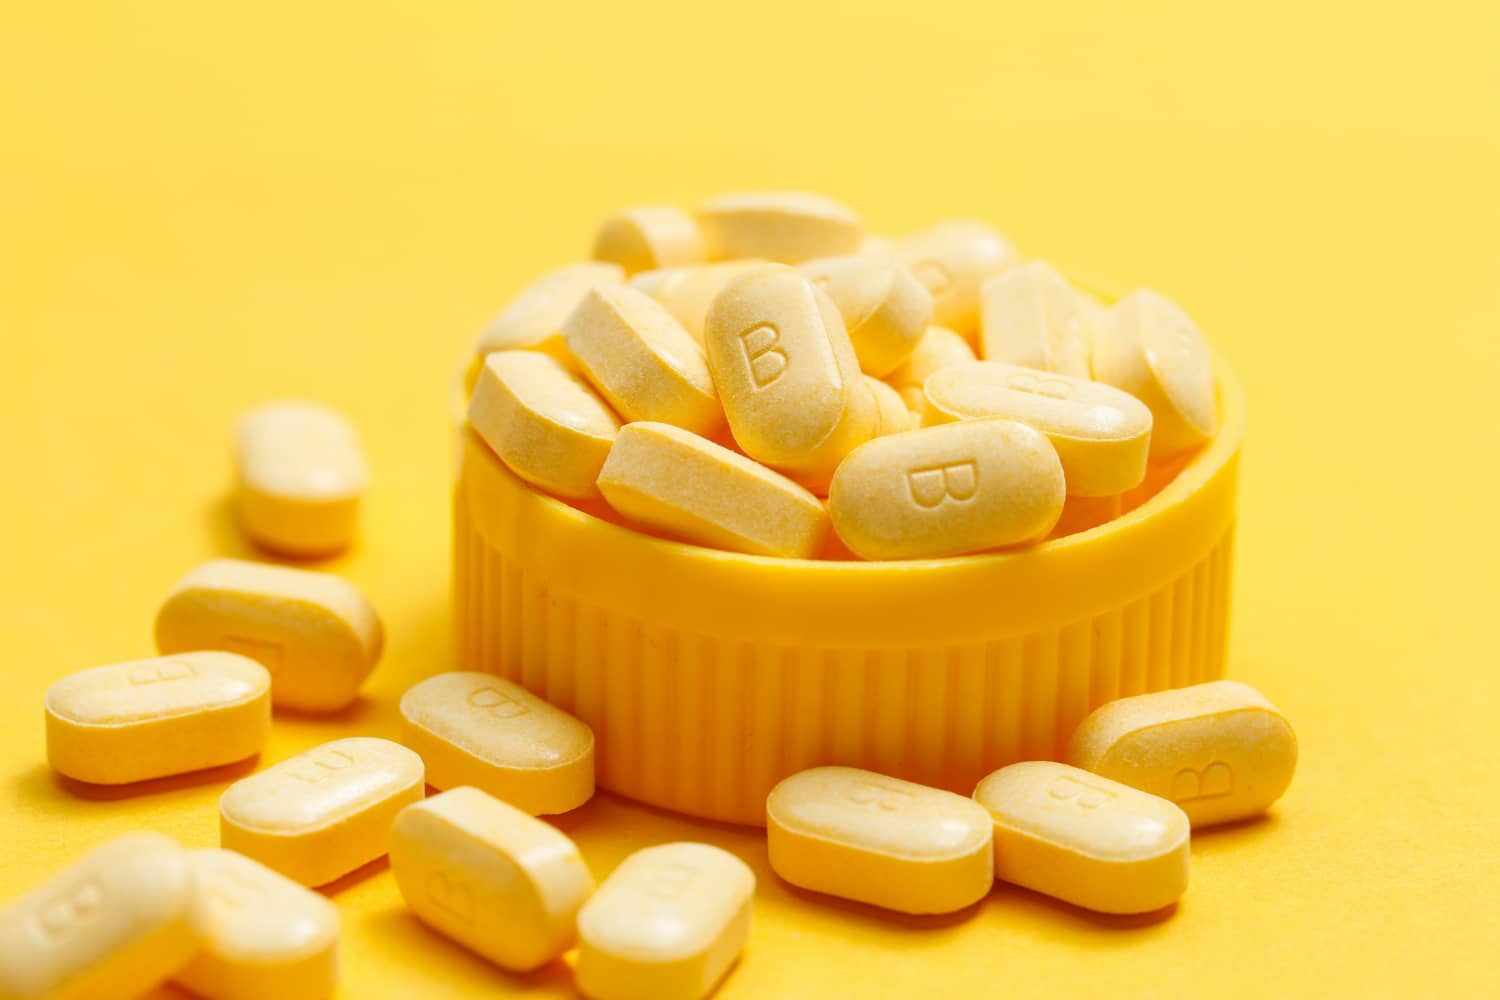 Vitamin b tablets on yellow background